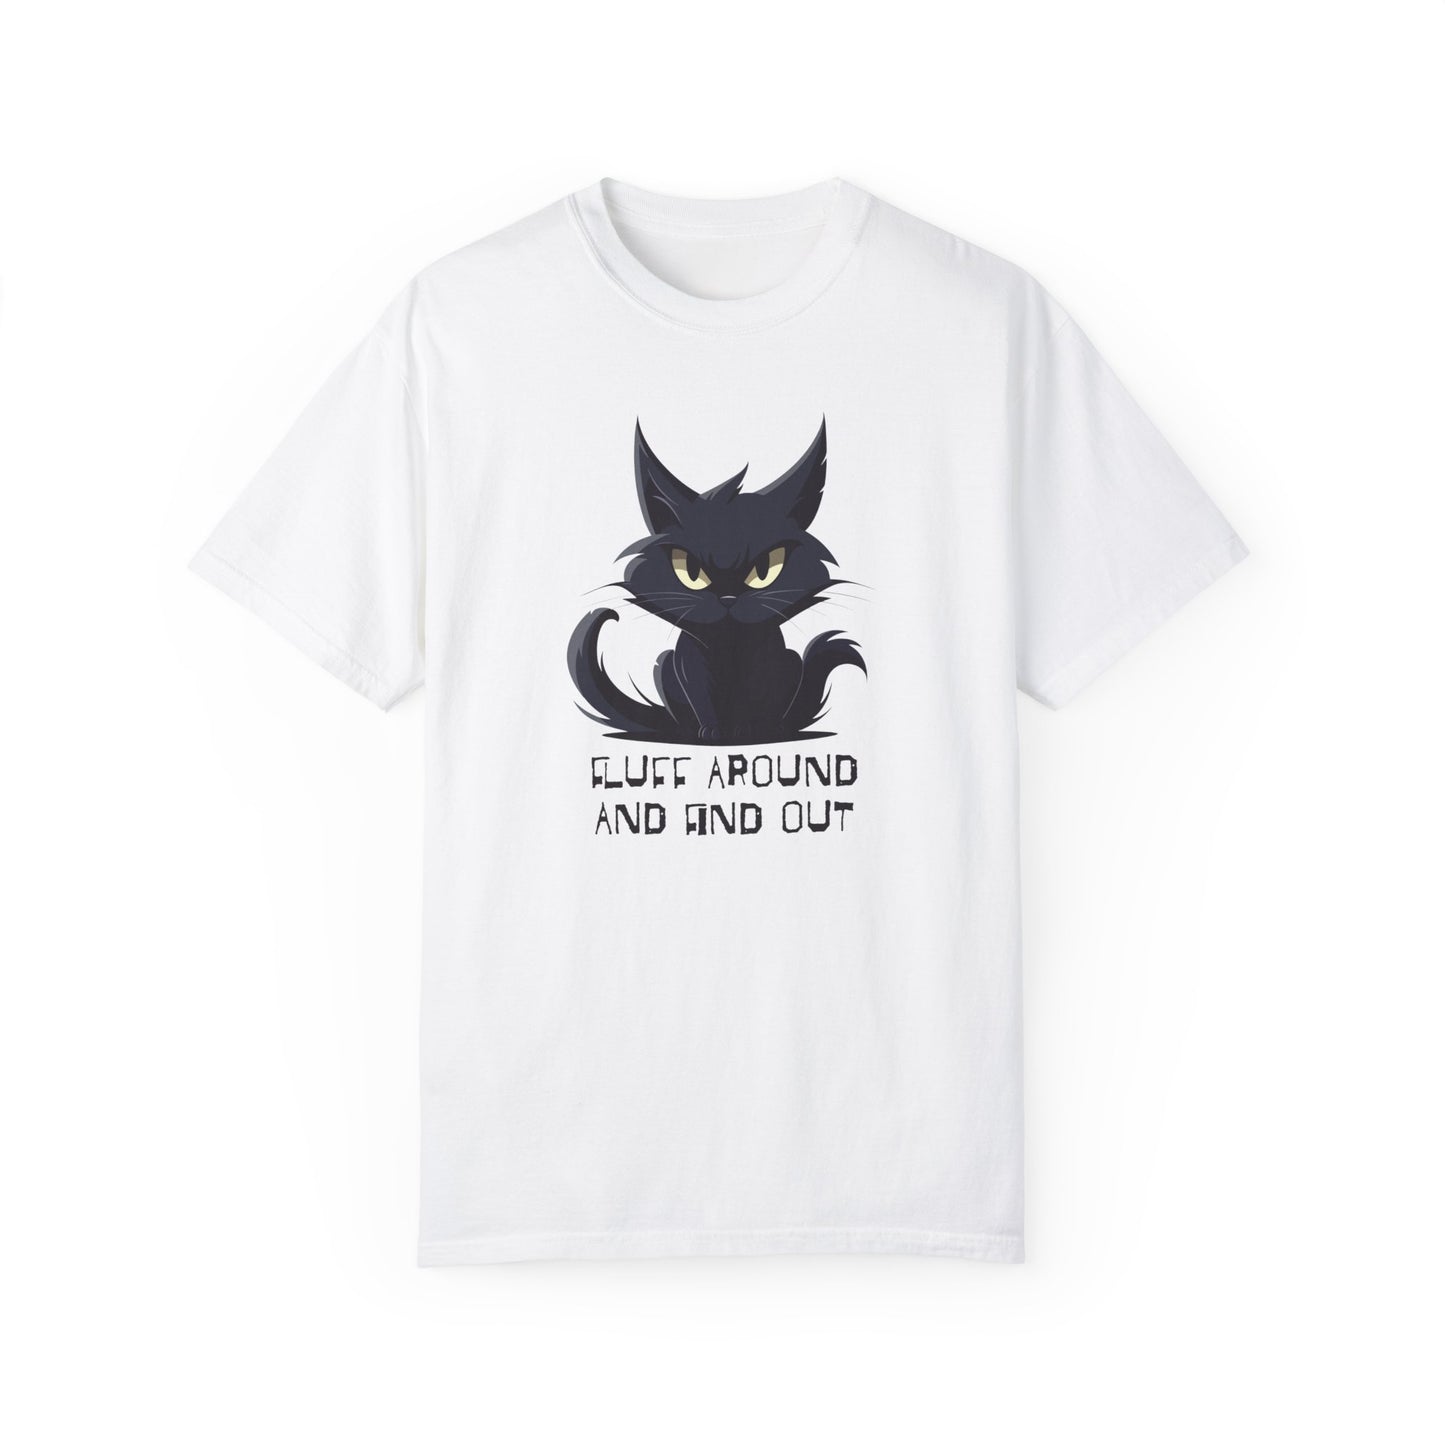 Sarcastic Cat T-Shirt For Funny Animated Feline TShirt For Sassy Cat Lover T Shirt Gift